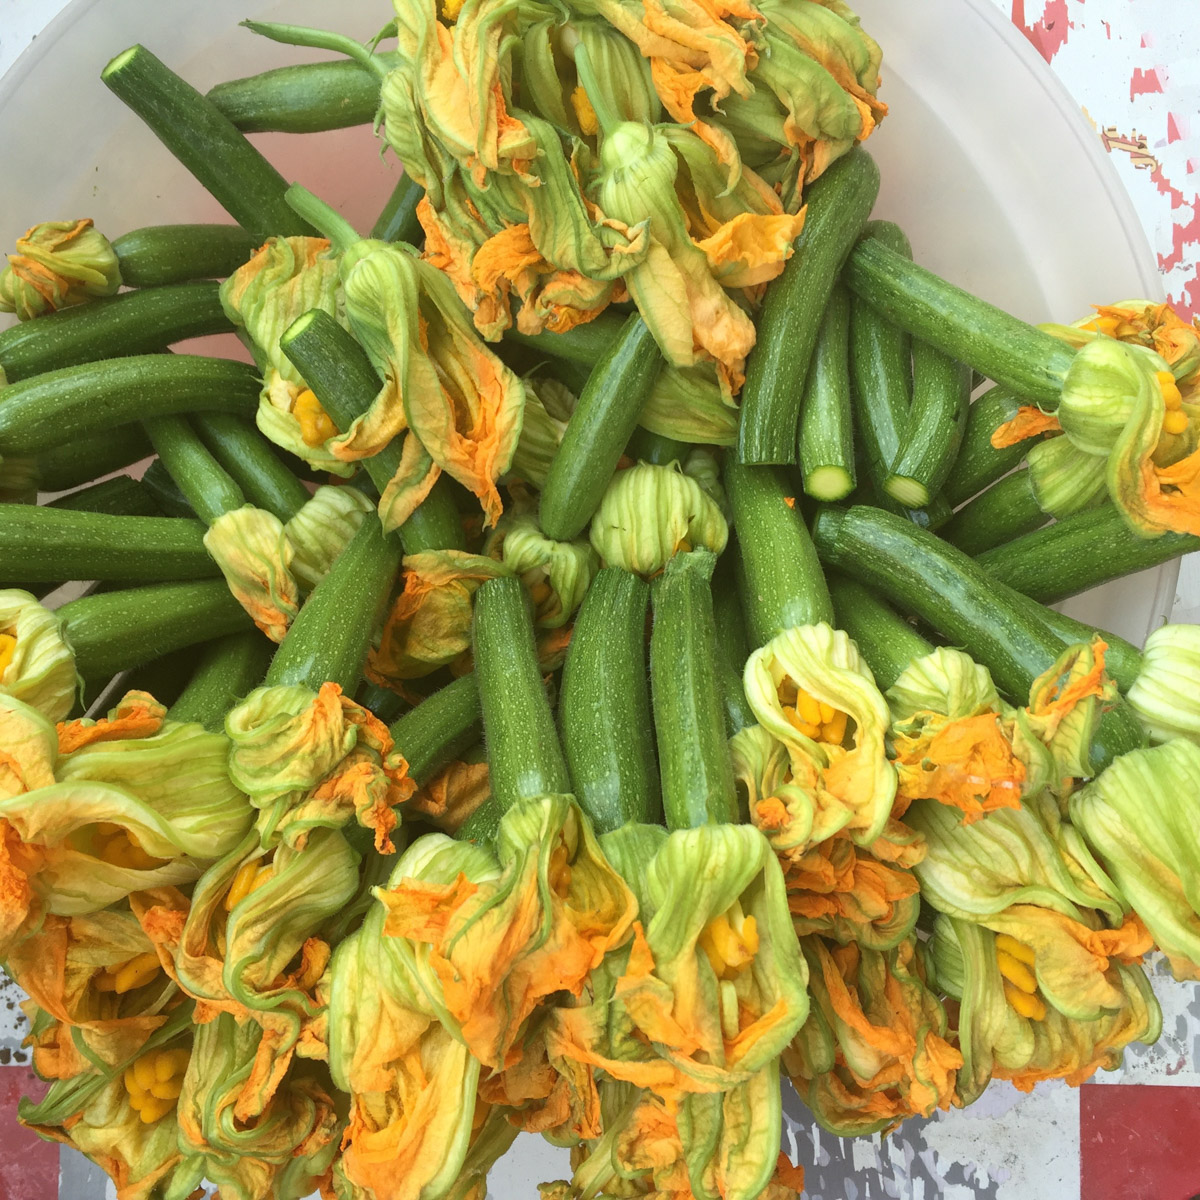 image of zucchini and flowers in a bowl